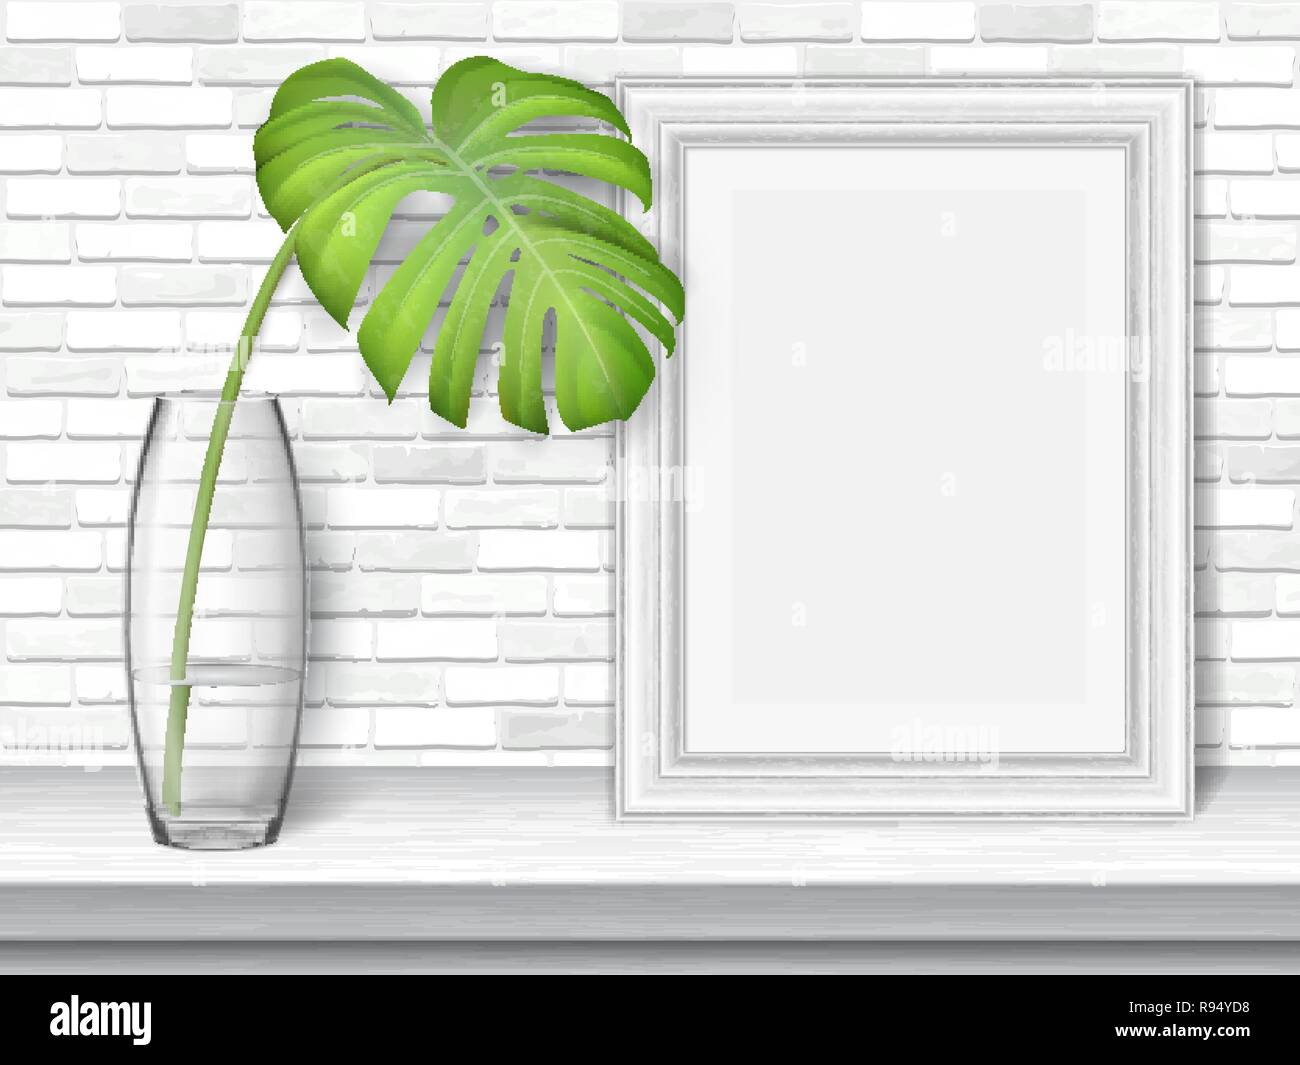 Monstera leaf and picture frame on a white table on brick wall background. Stock Vector